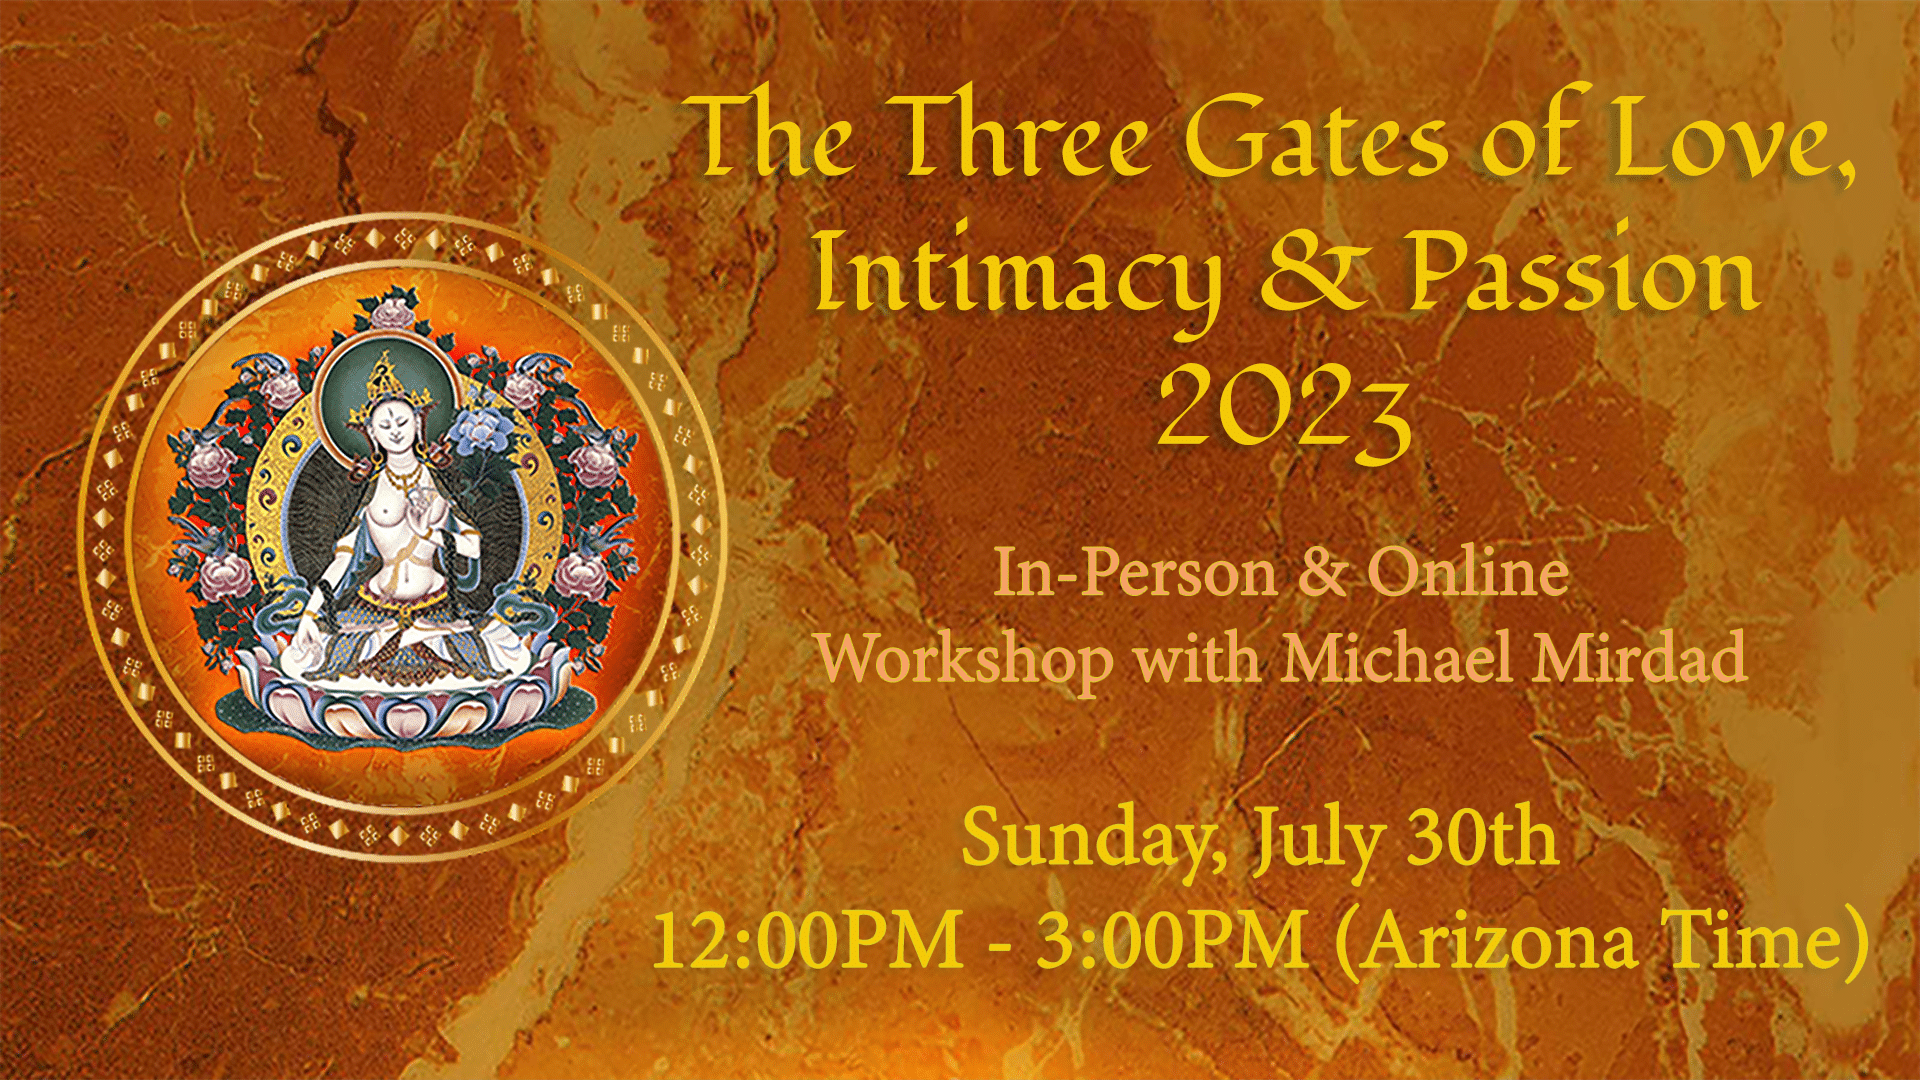 The three gates of love, Michael Mirdad's spiritual growth teachings, lead to inner peace and passion.